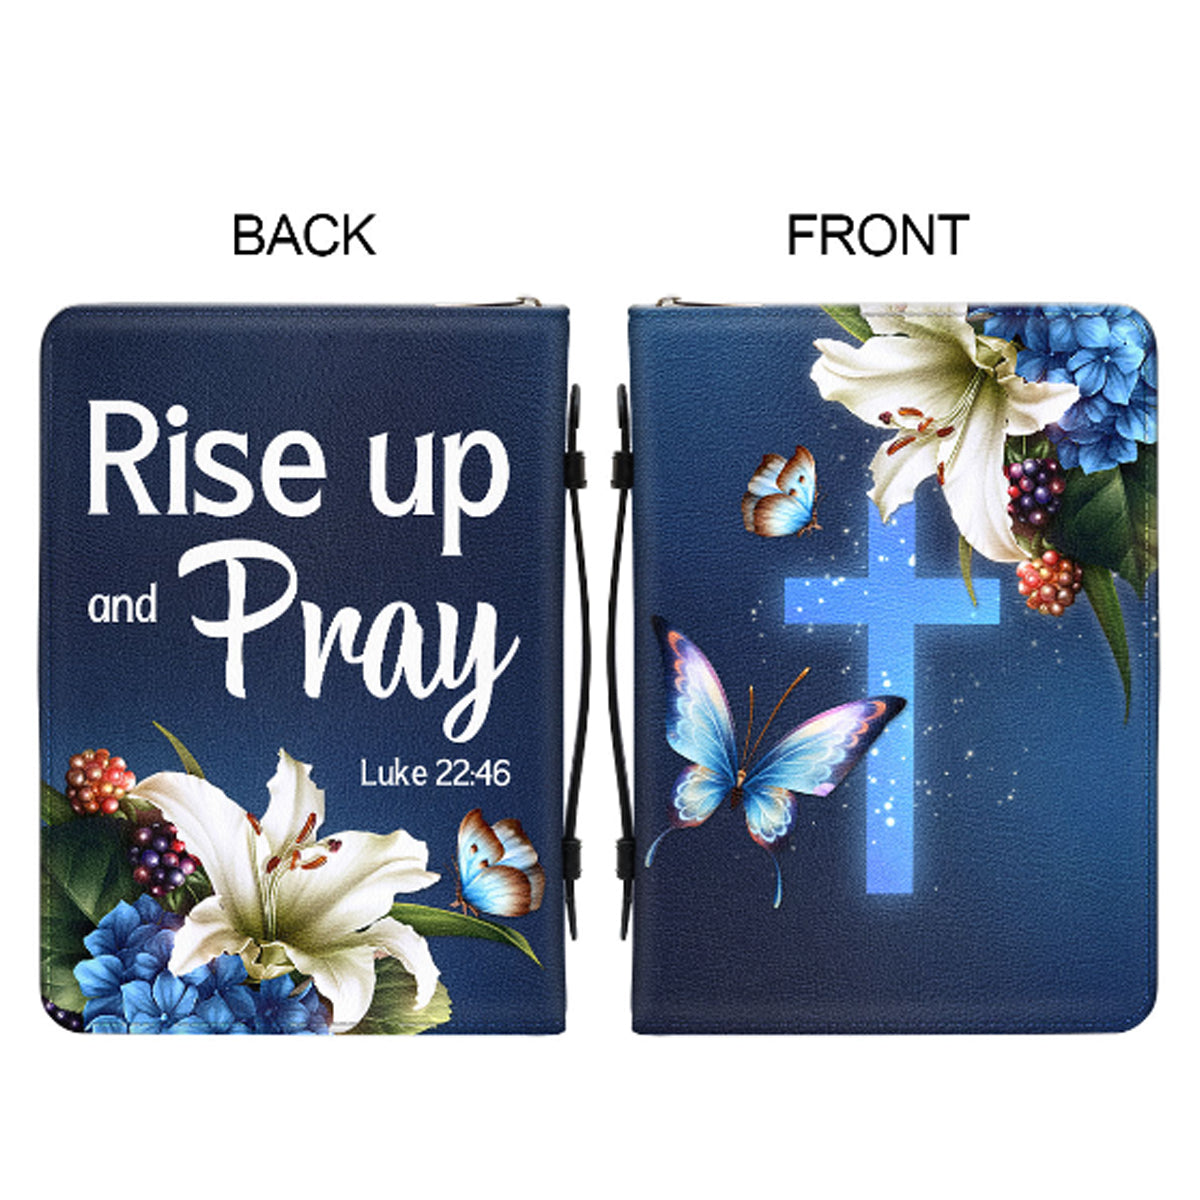 Christianartbag Bible Cover, Rise Up And Pray Luke 22:46, Personalized Bible Cover, Gifts For Women, Christmas Gift, CABBBCV01030823. - Christian Art Bag